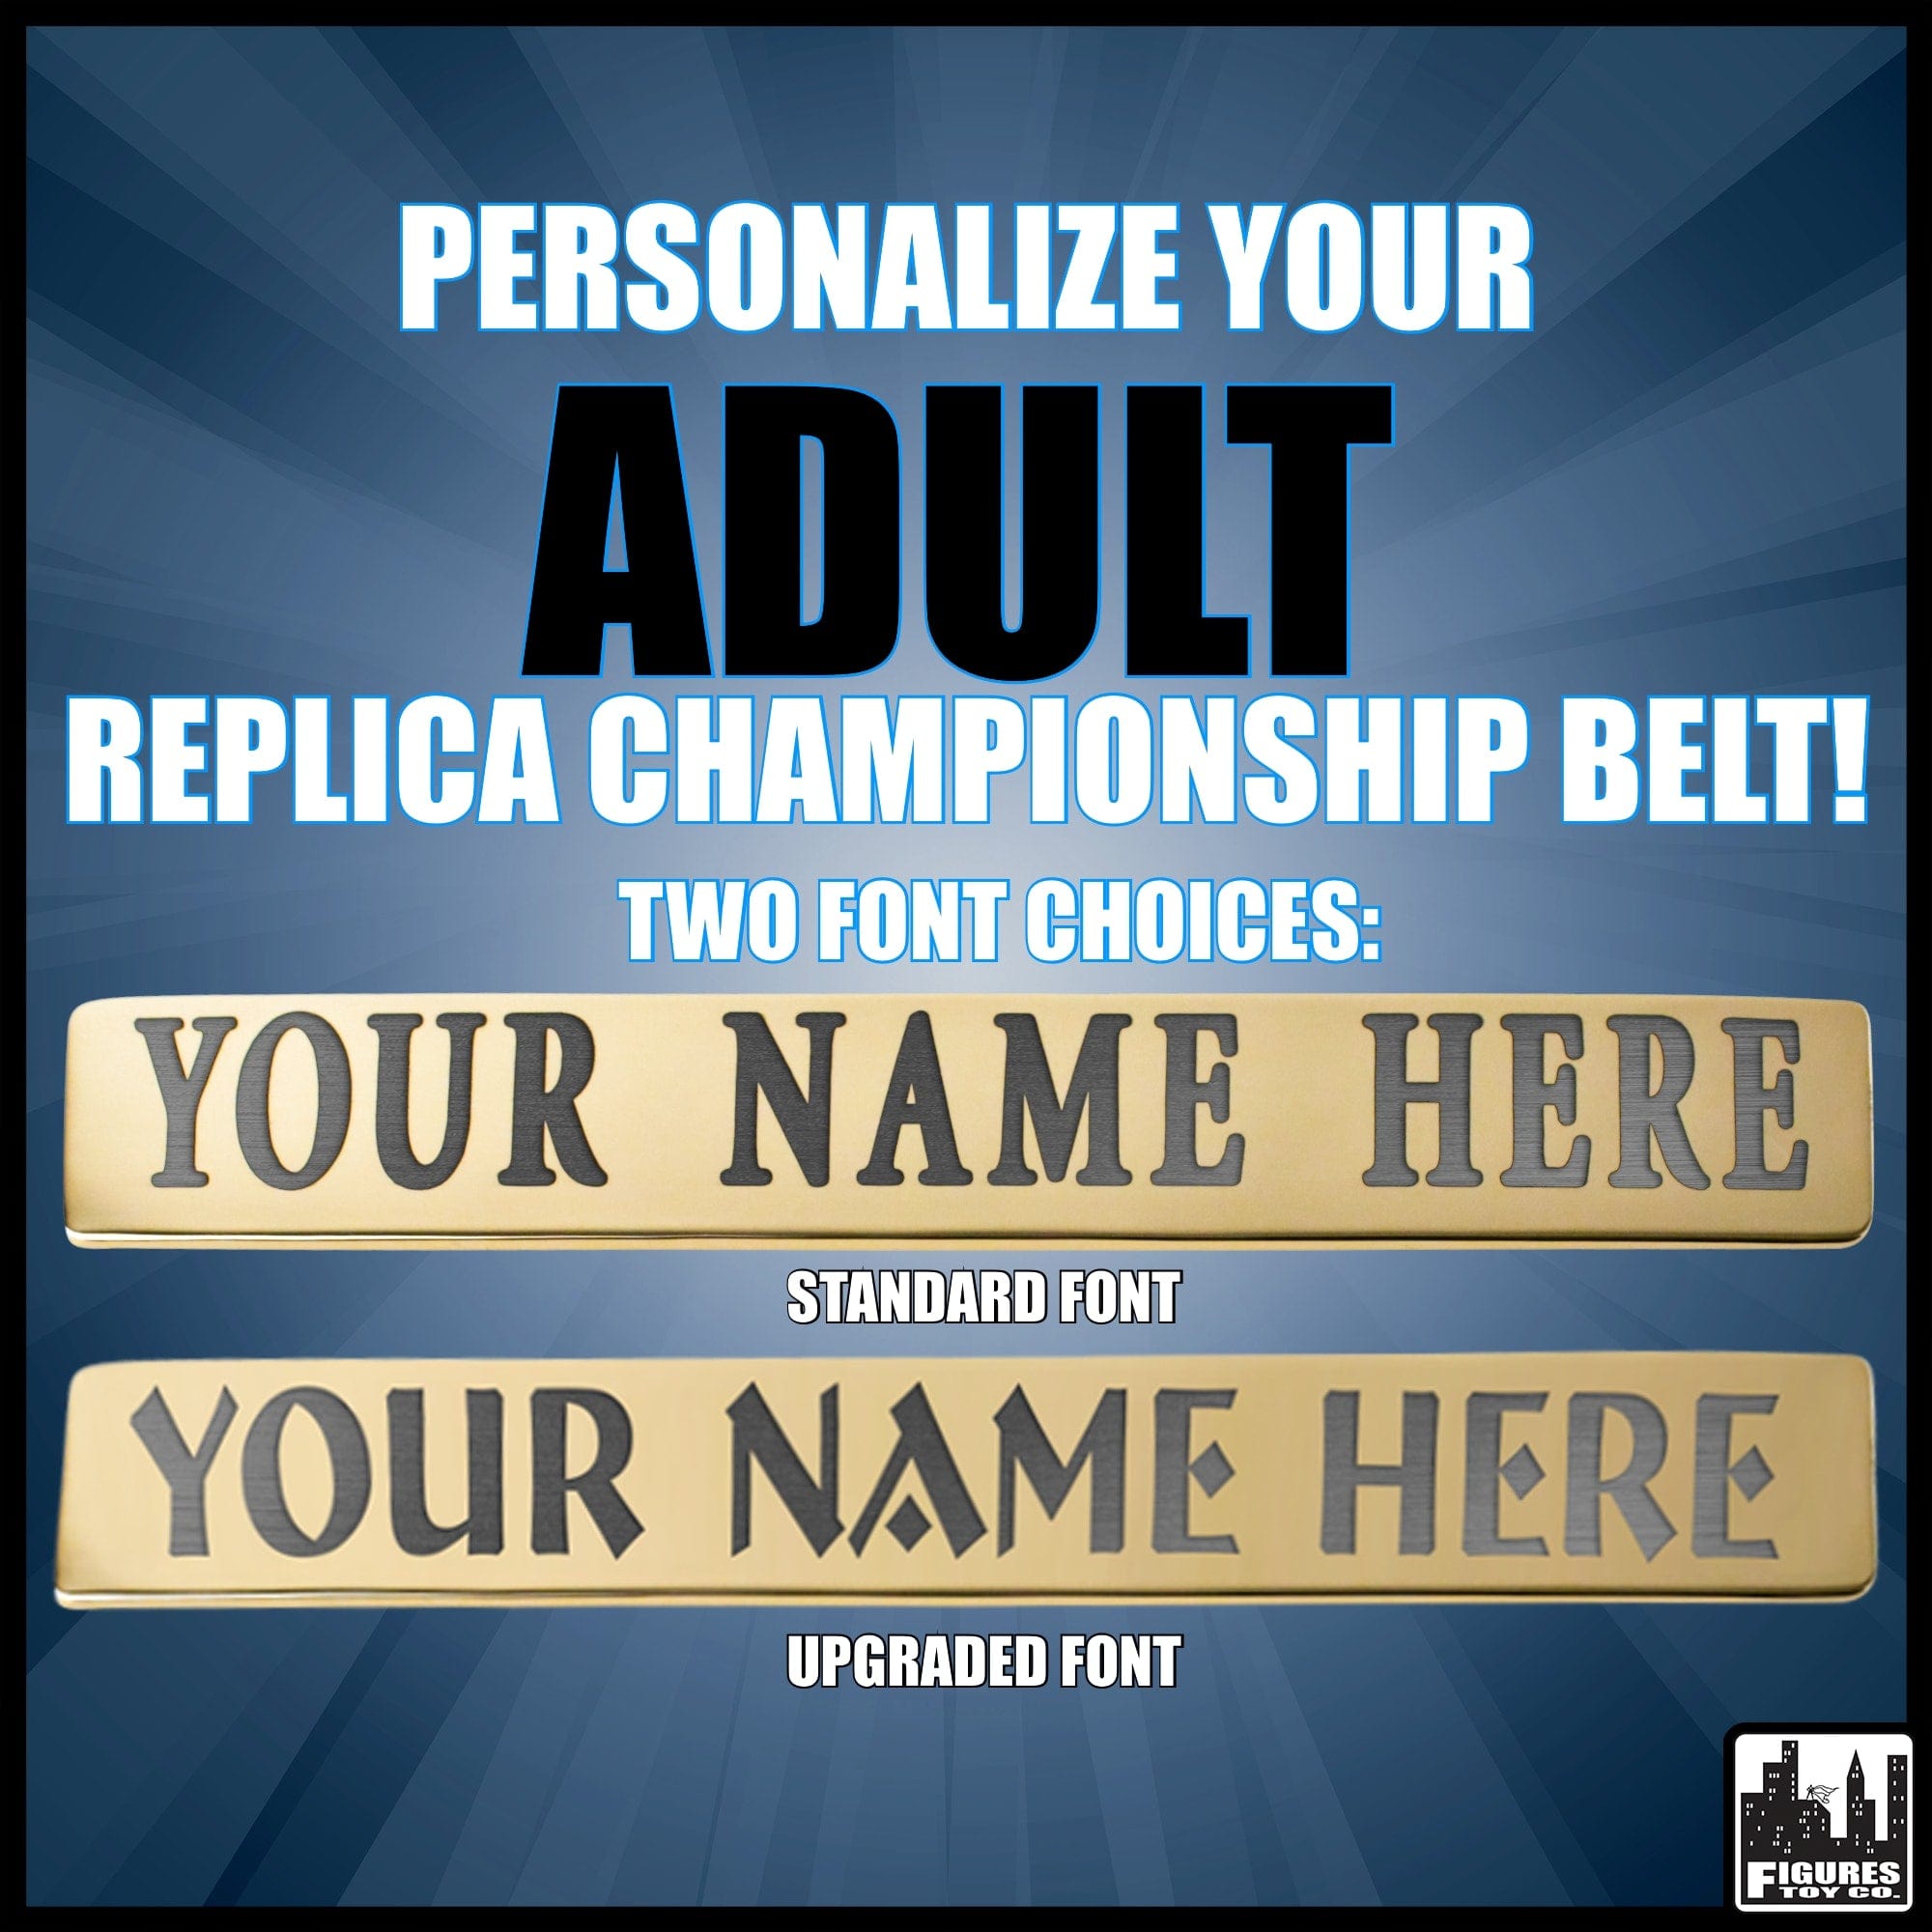 Personalized Nameplate for Adult/Deluxe Size WWE Championship Replica Belts